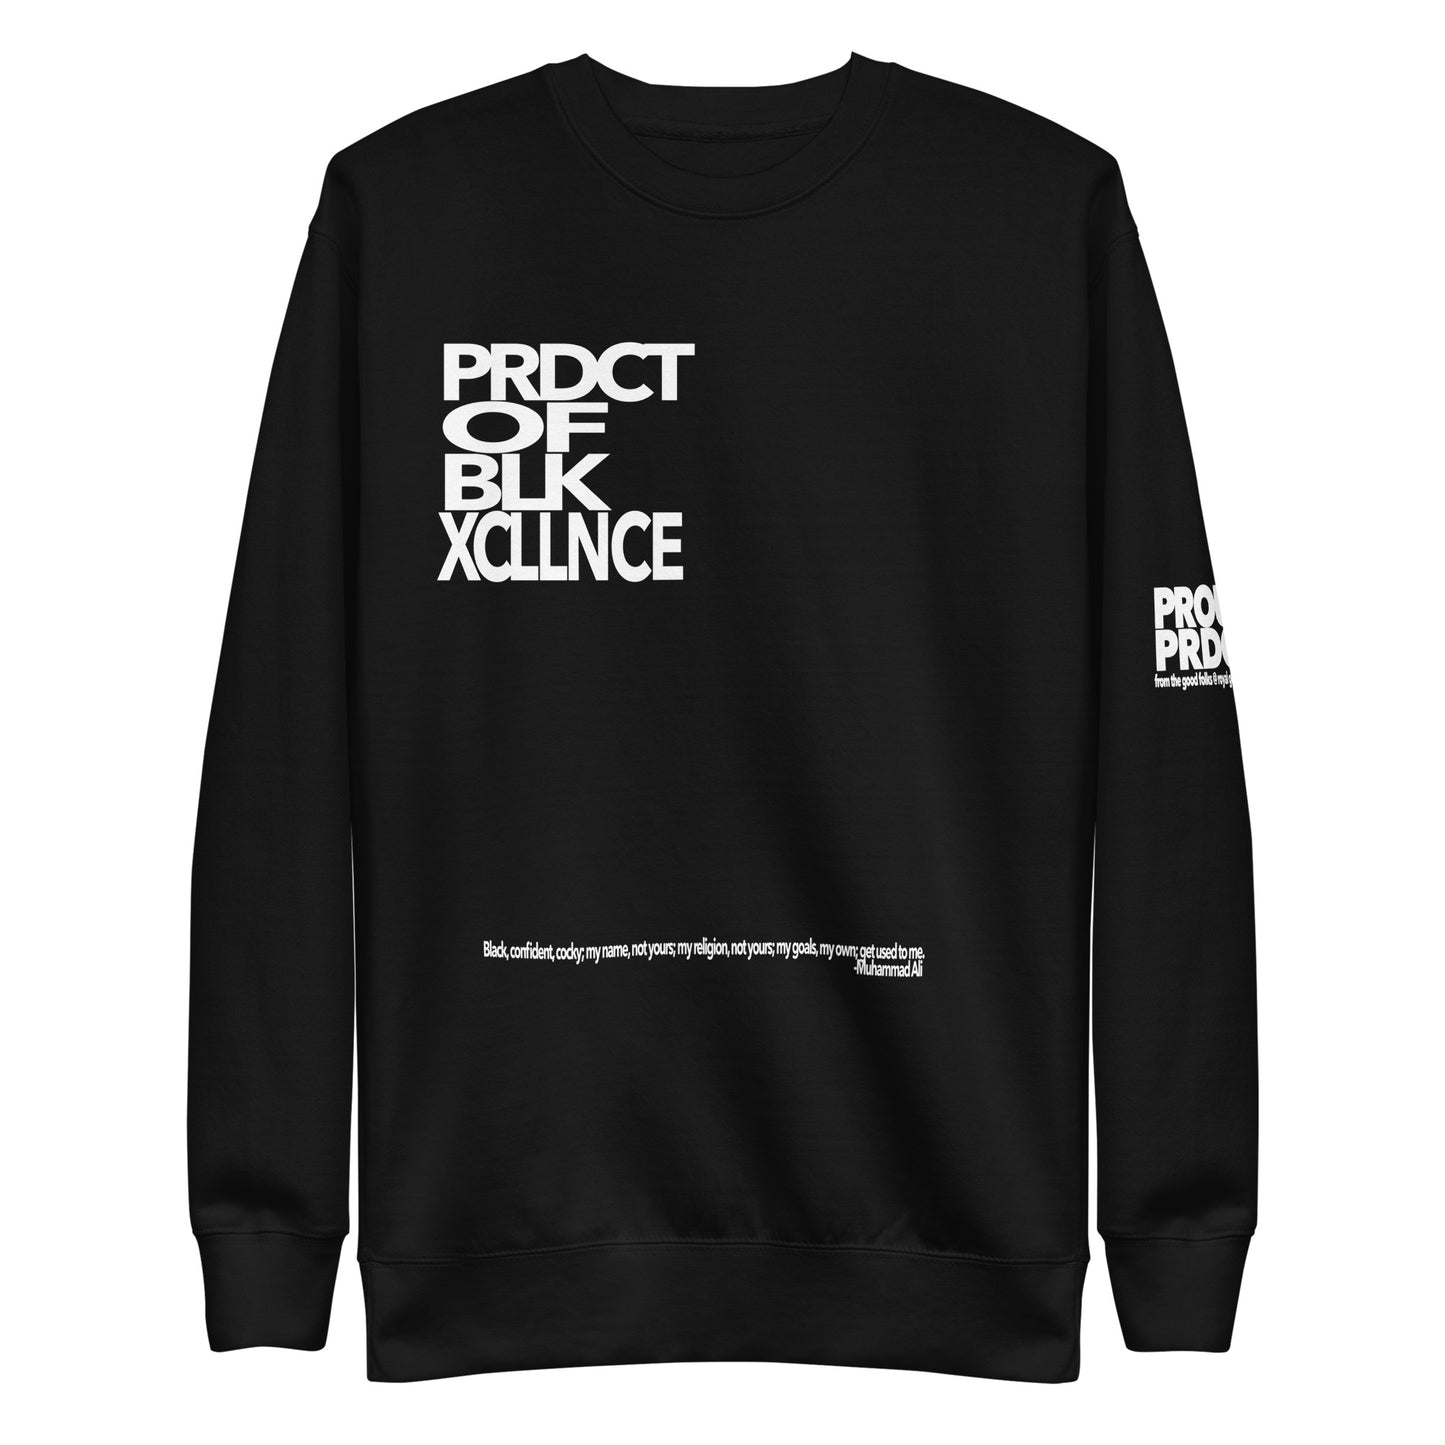 "Product of Black Excellence" Sweatshirt